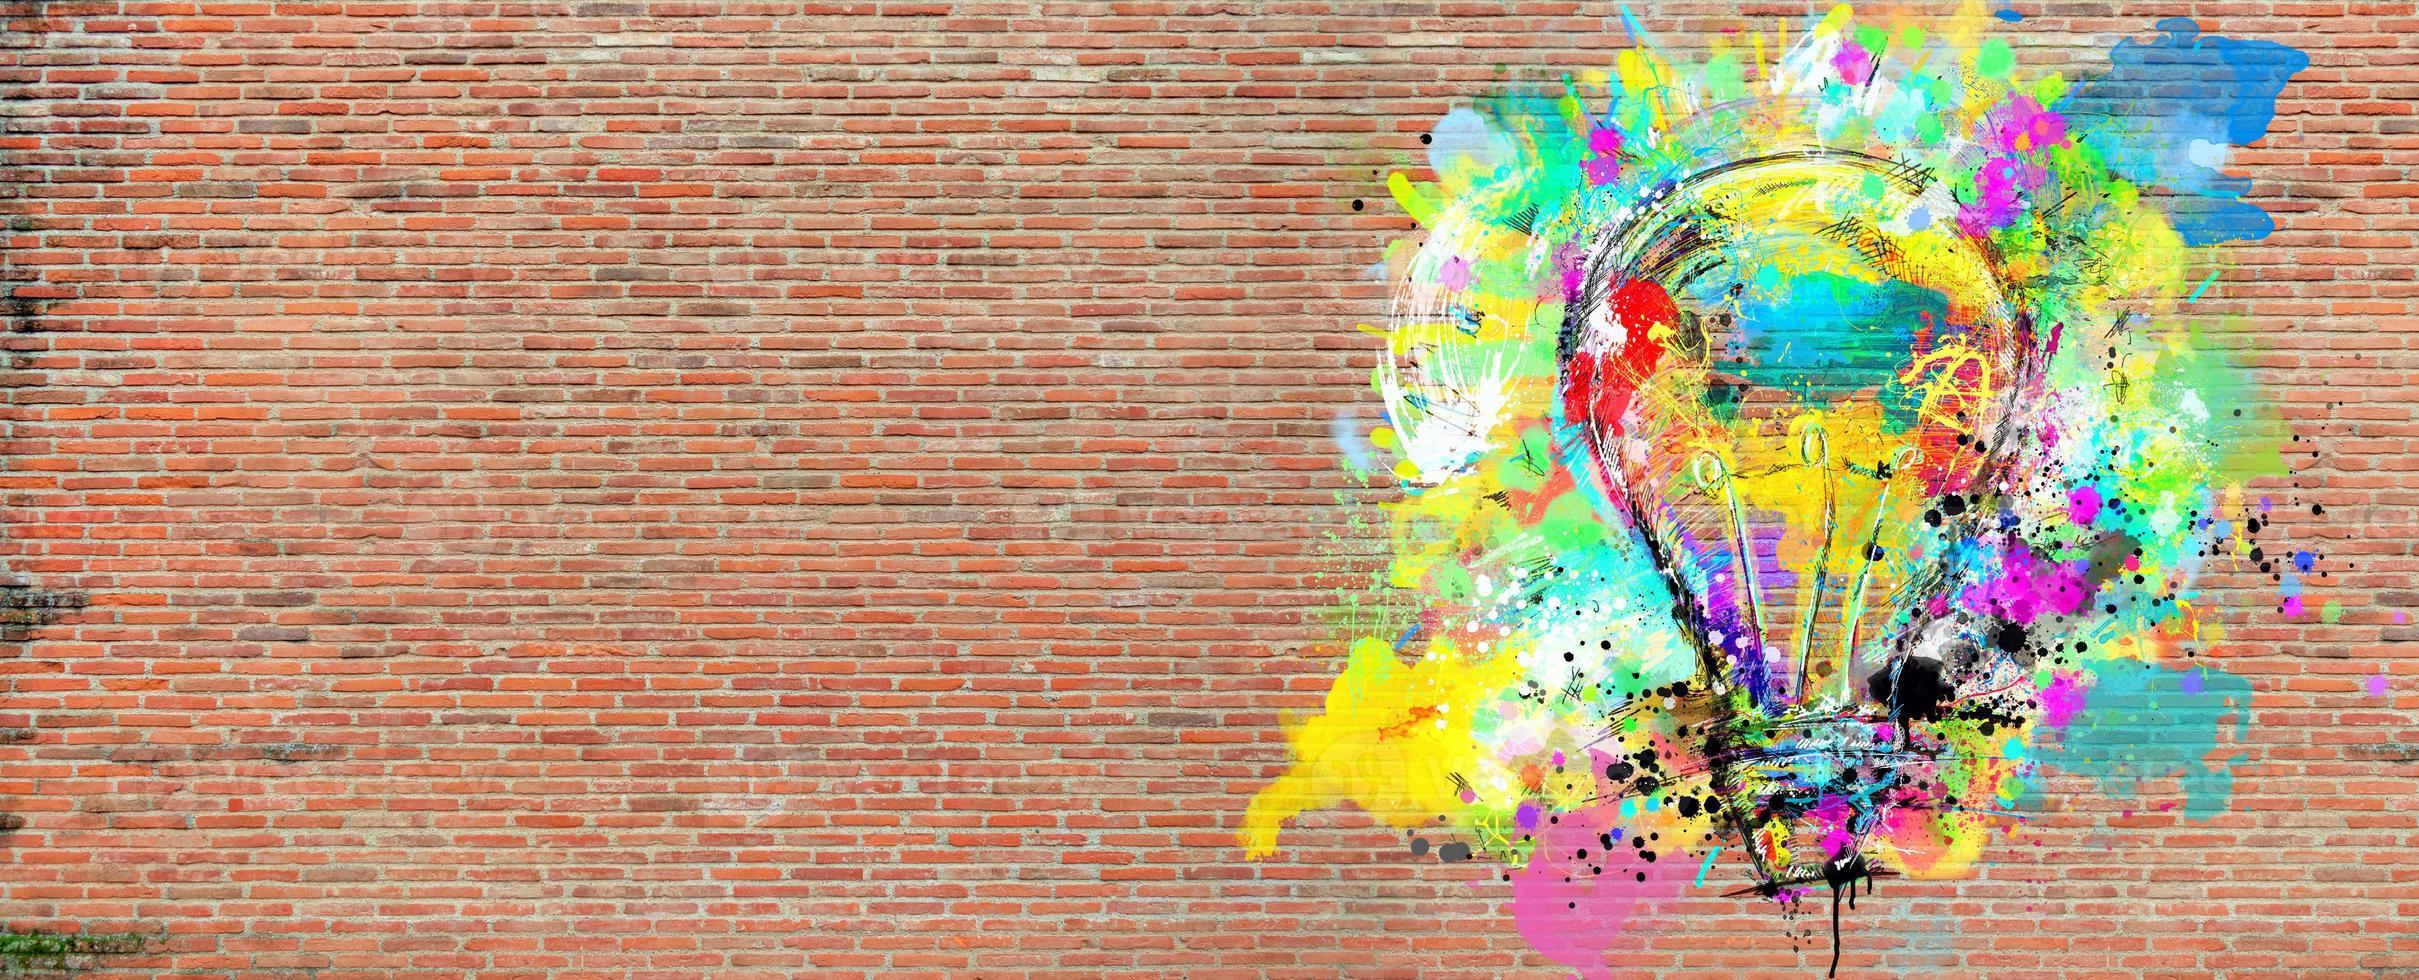 Big stylized light bulb on a big wall of bricks drawn with splashes of colored paint. Concept of innovation and creativity brick photo